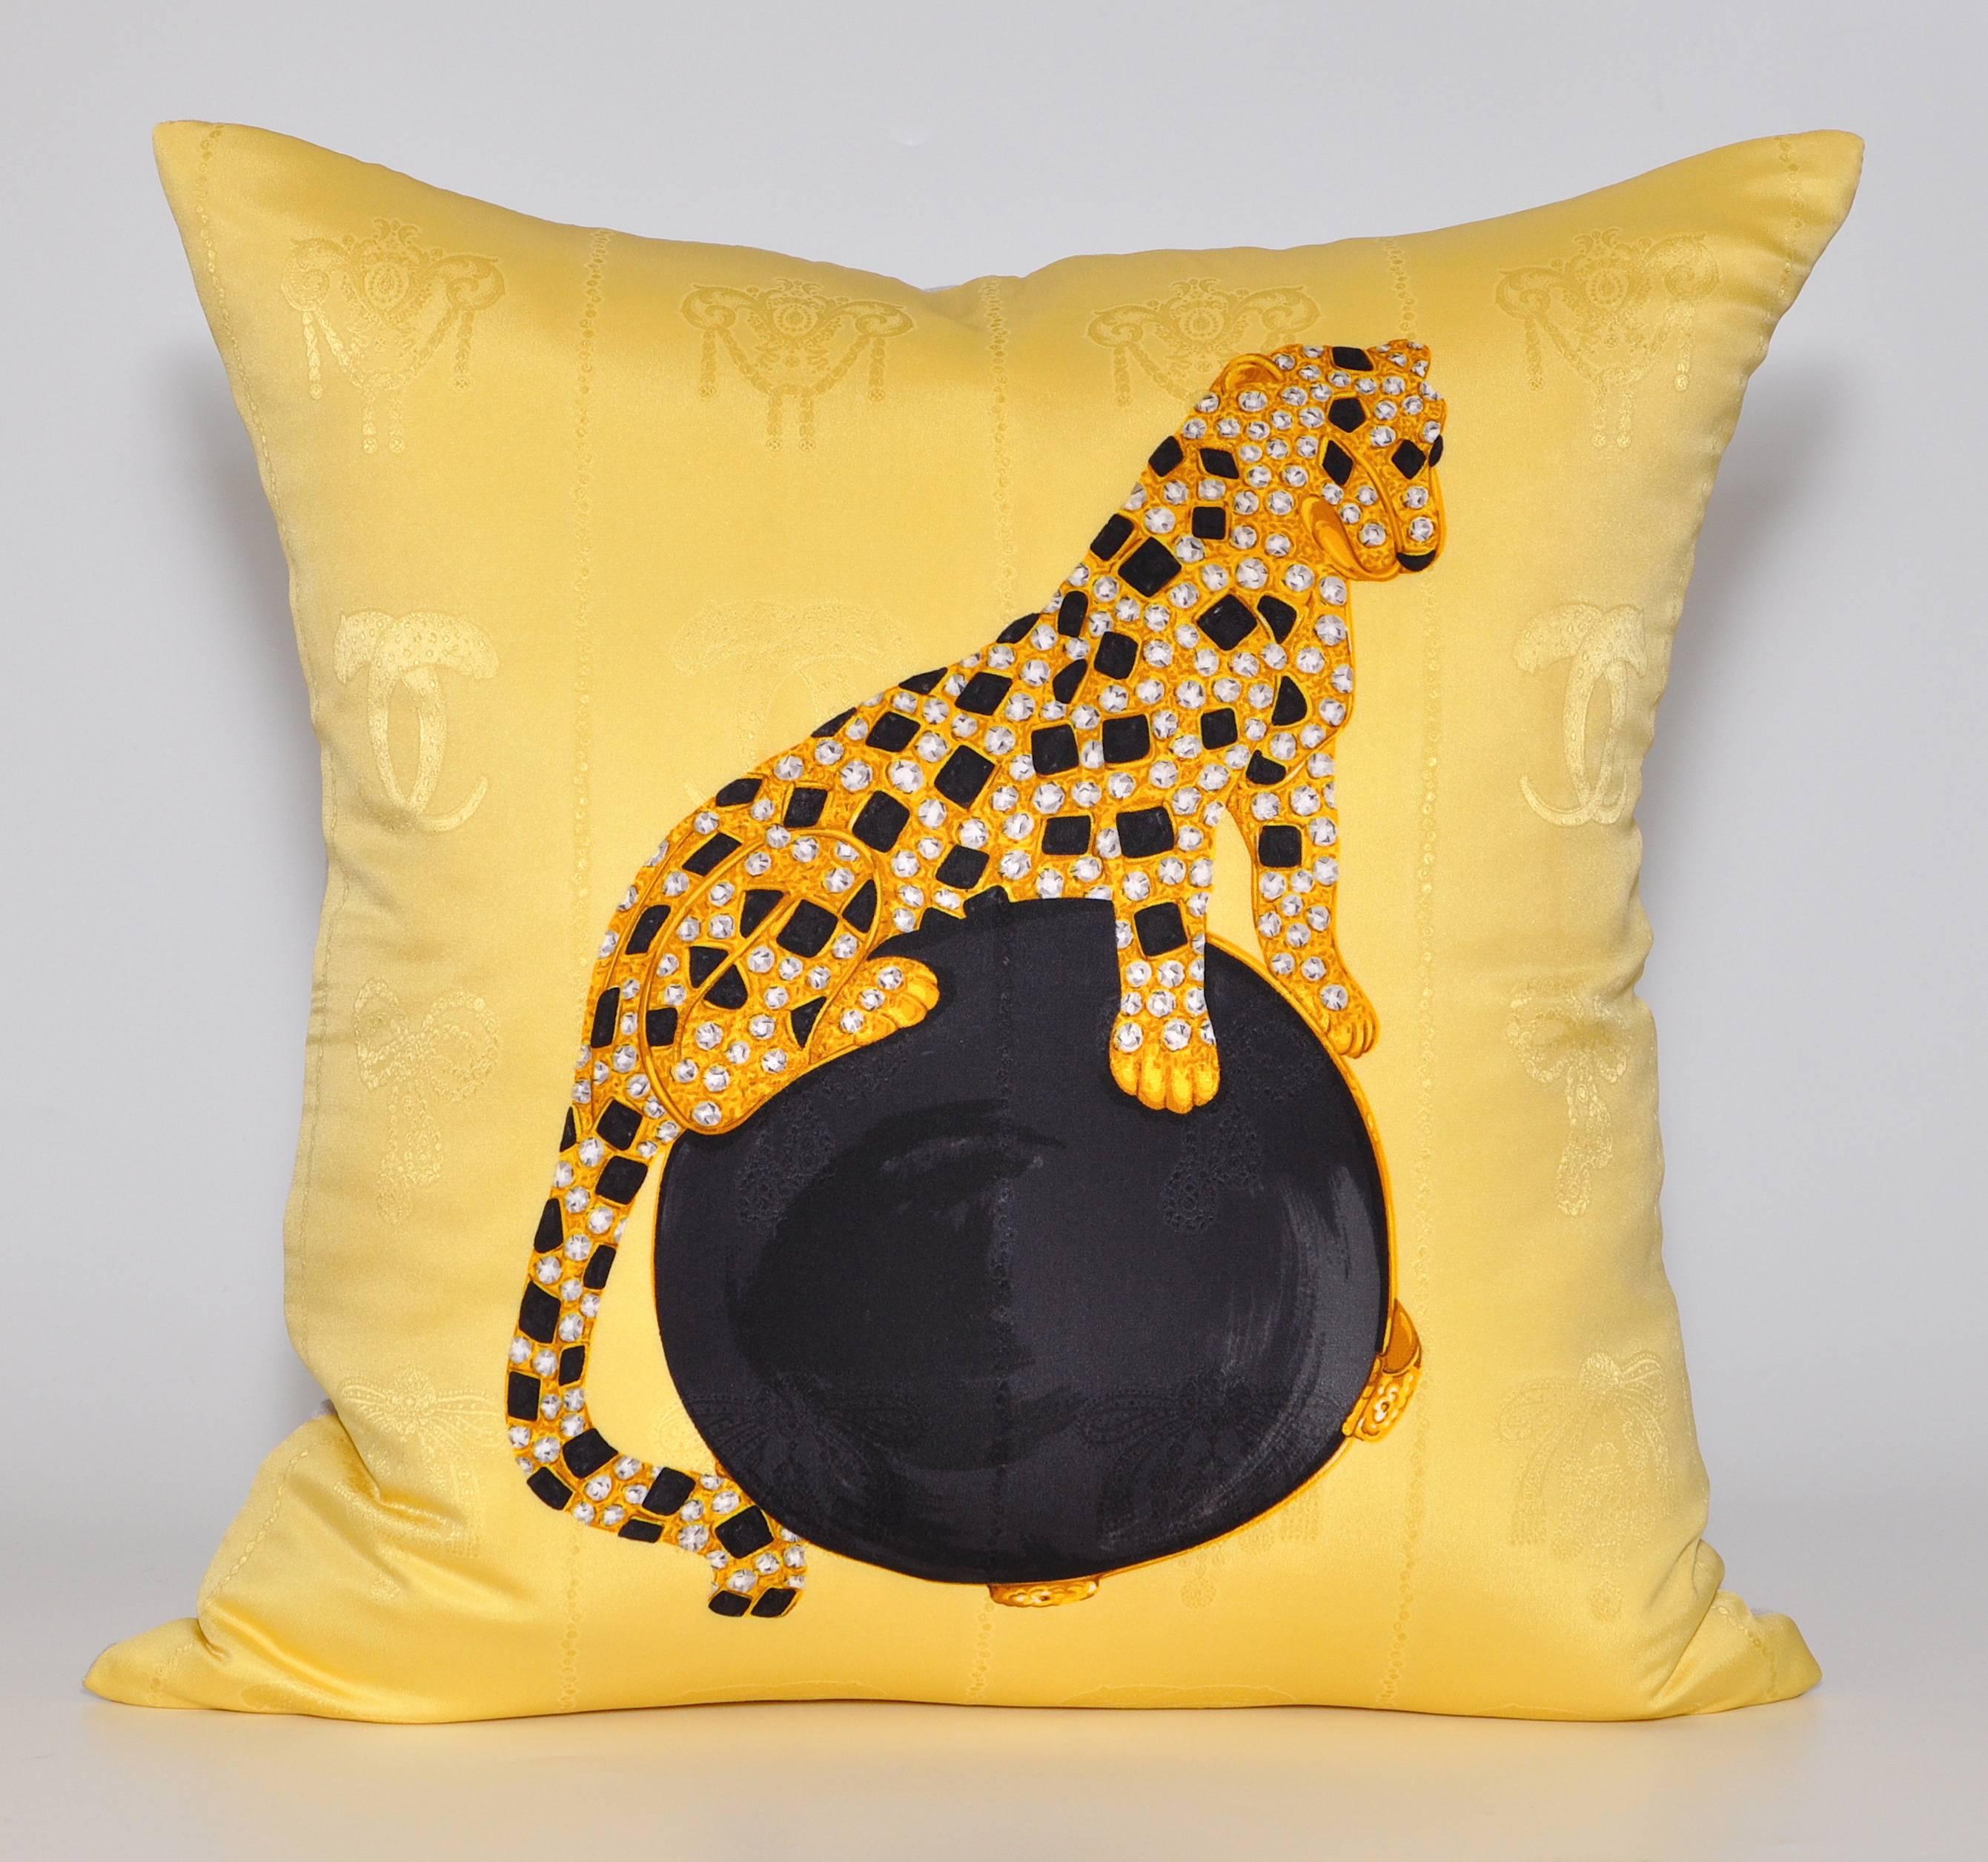 Pair of stunning large custom-made one-of-a-kind luxury cushions (pillows) created from rare matching exquisite vintage pure silk Cartier fashion scarves in a striking bold design. It features their signature iconic Panther perched on top of a